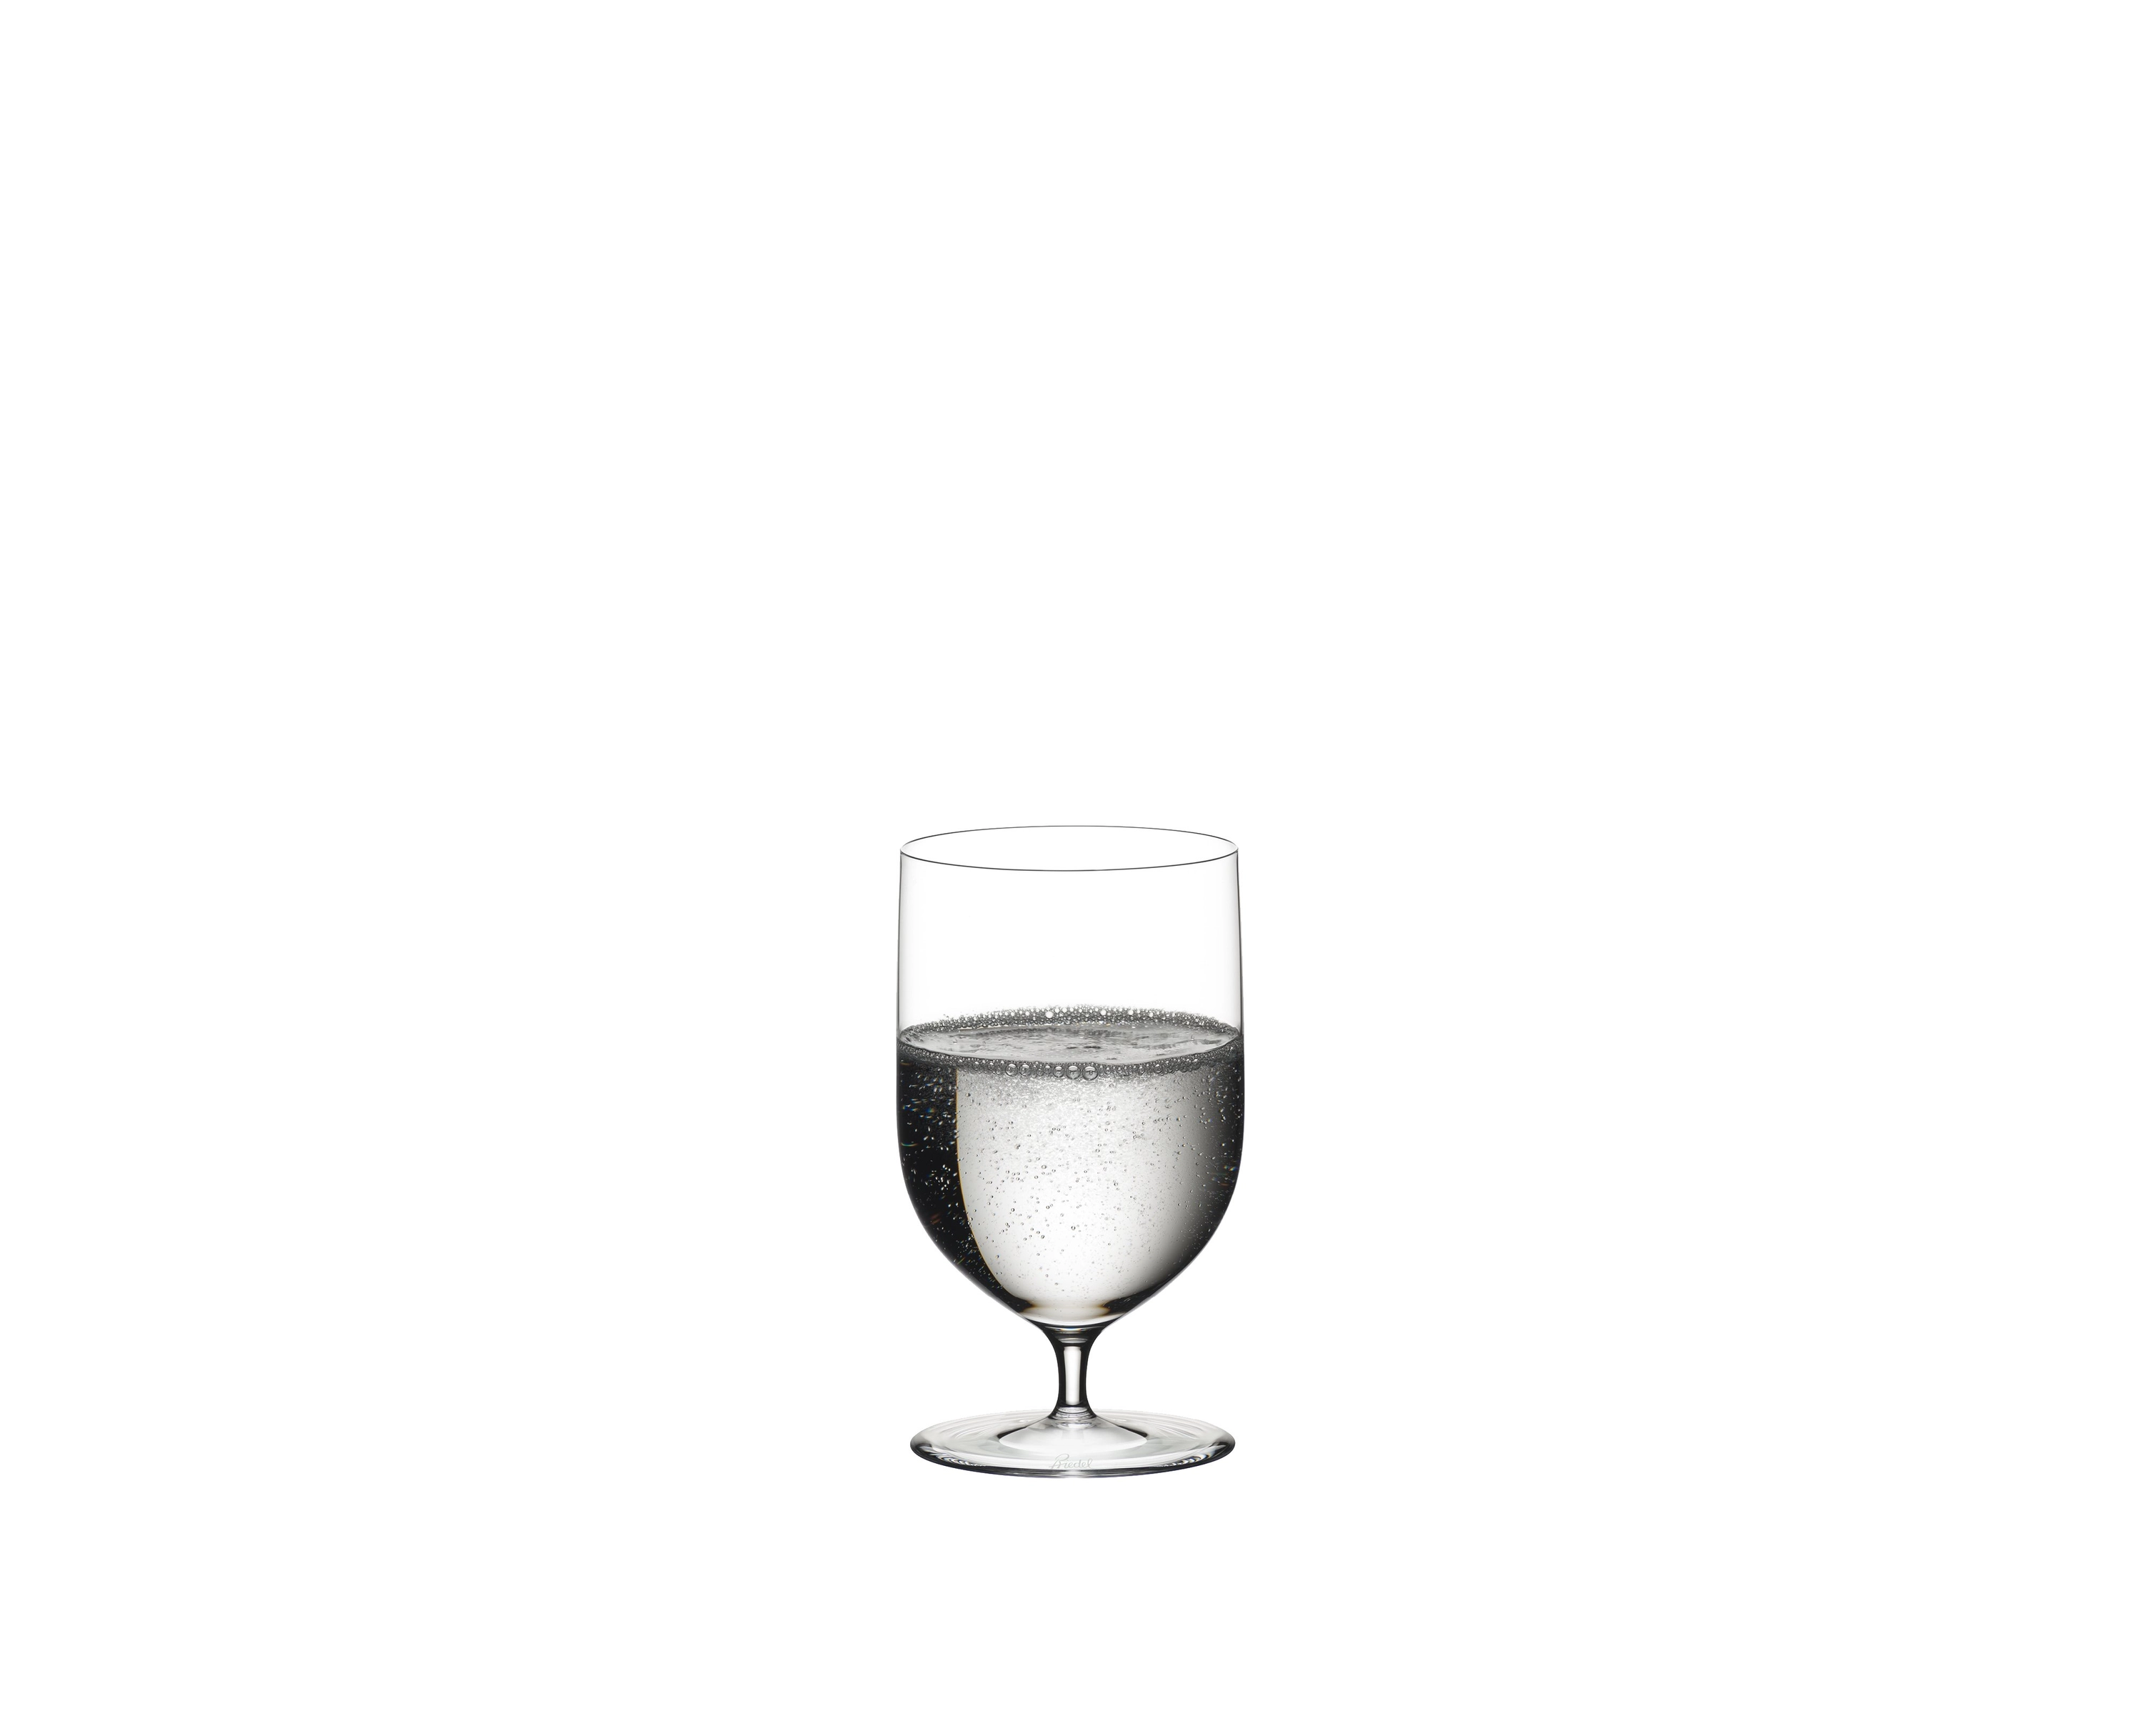 Riedel Sommeliers Goblet Water, Set of 6 pieces